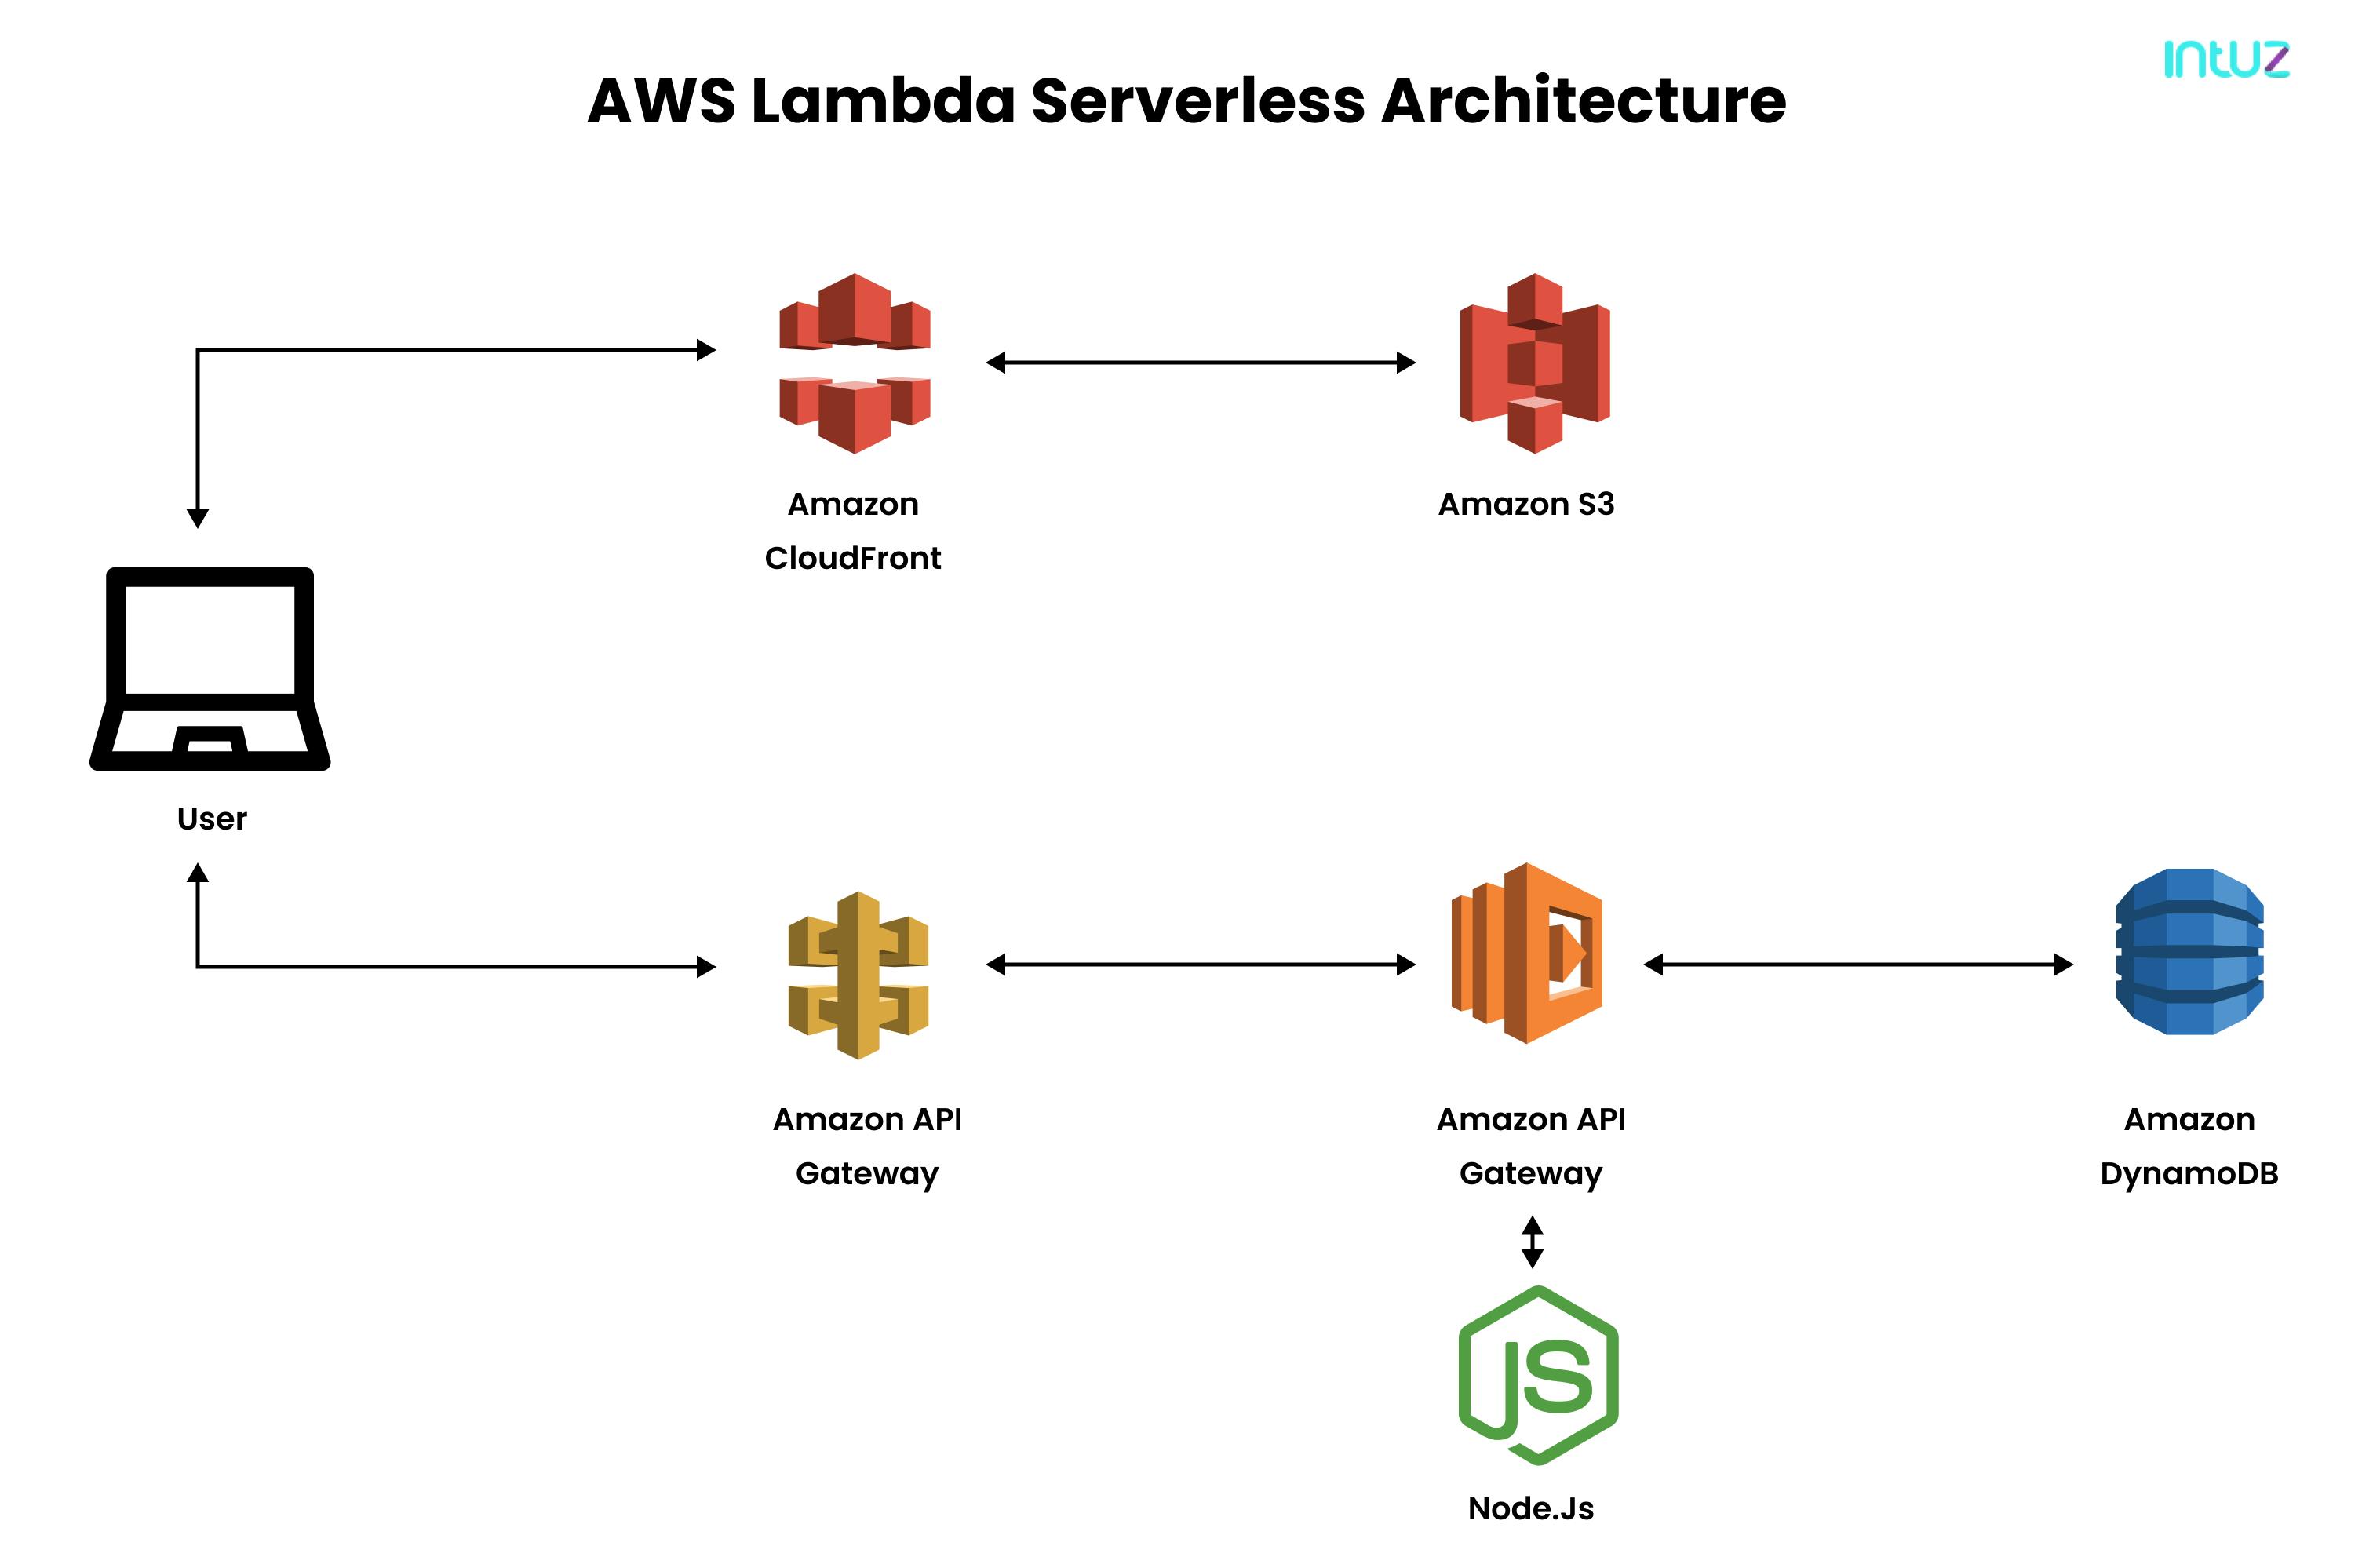 Build Serverless Disposable Email Address Architecture on AWS